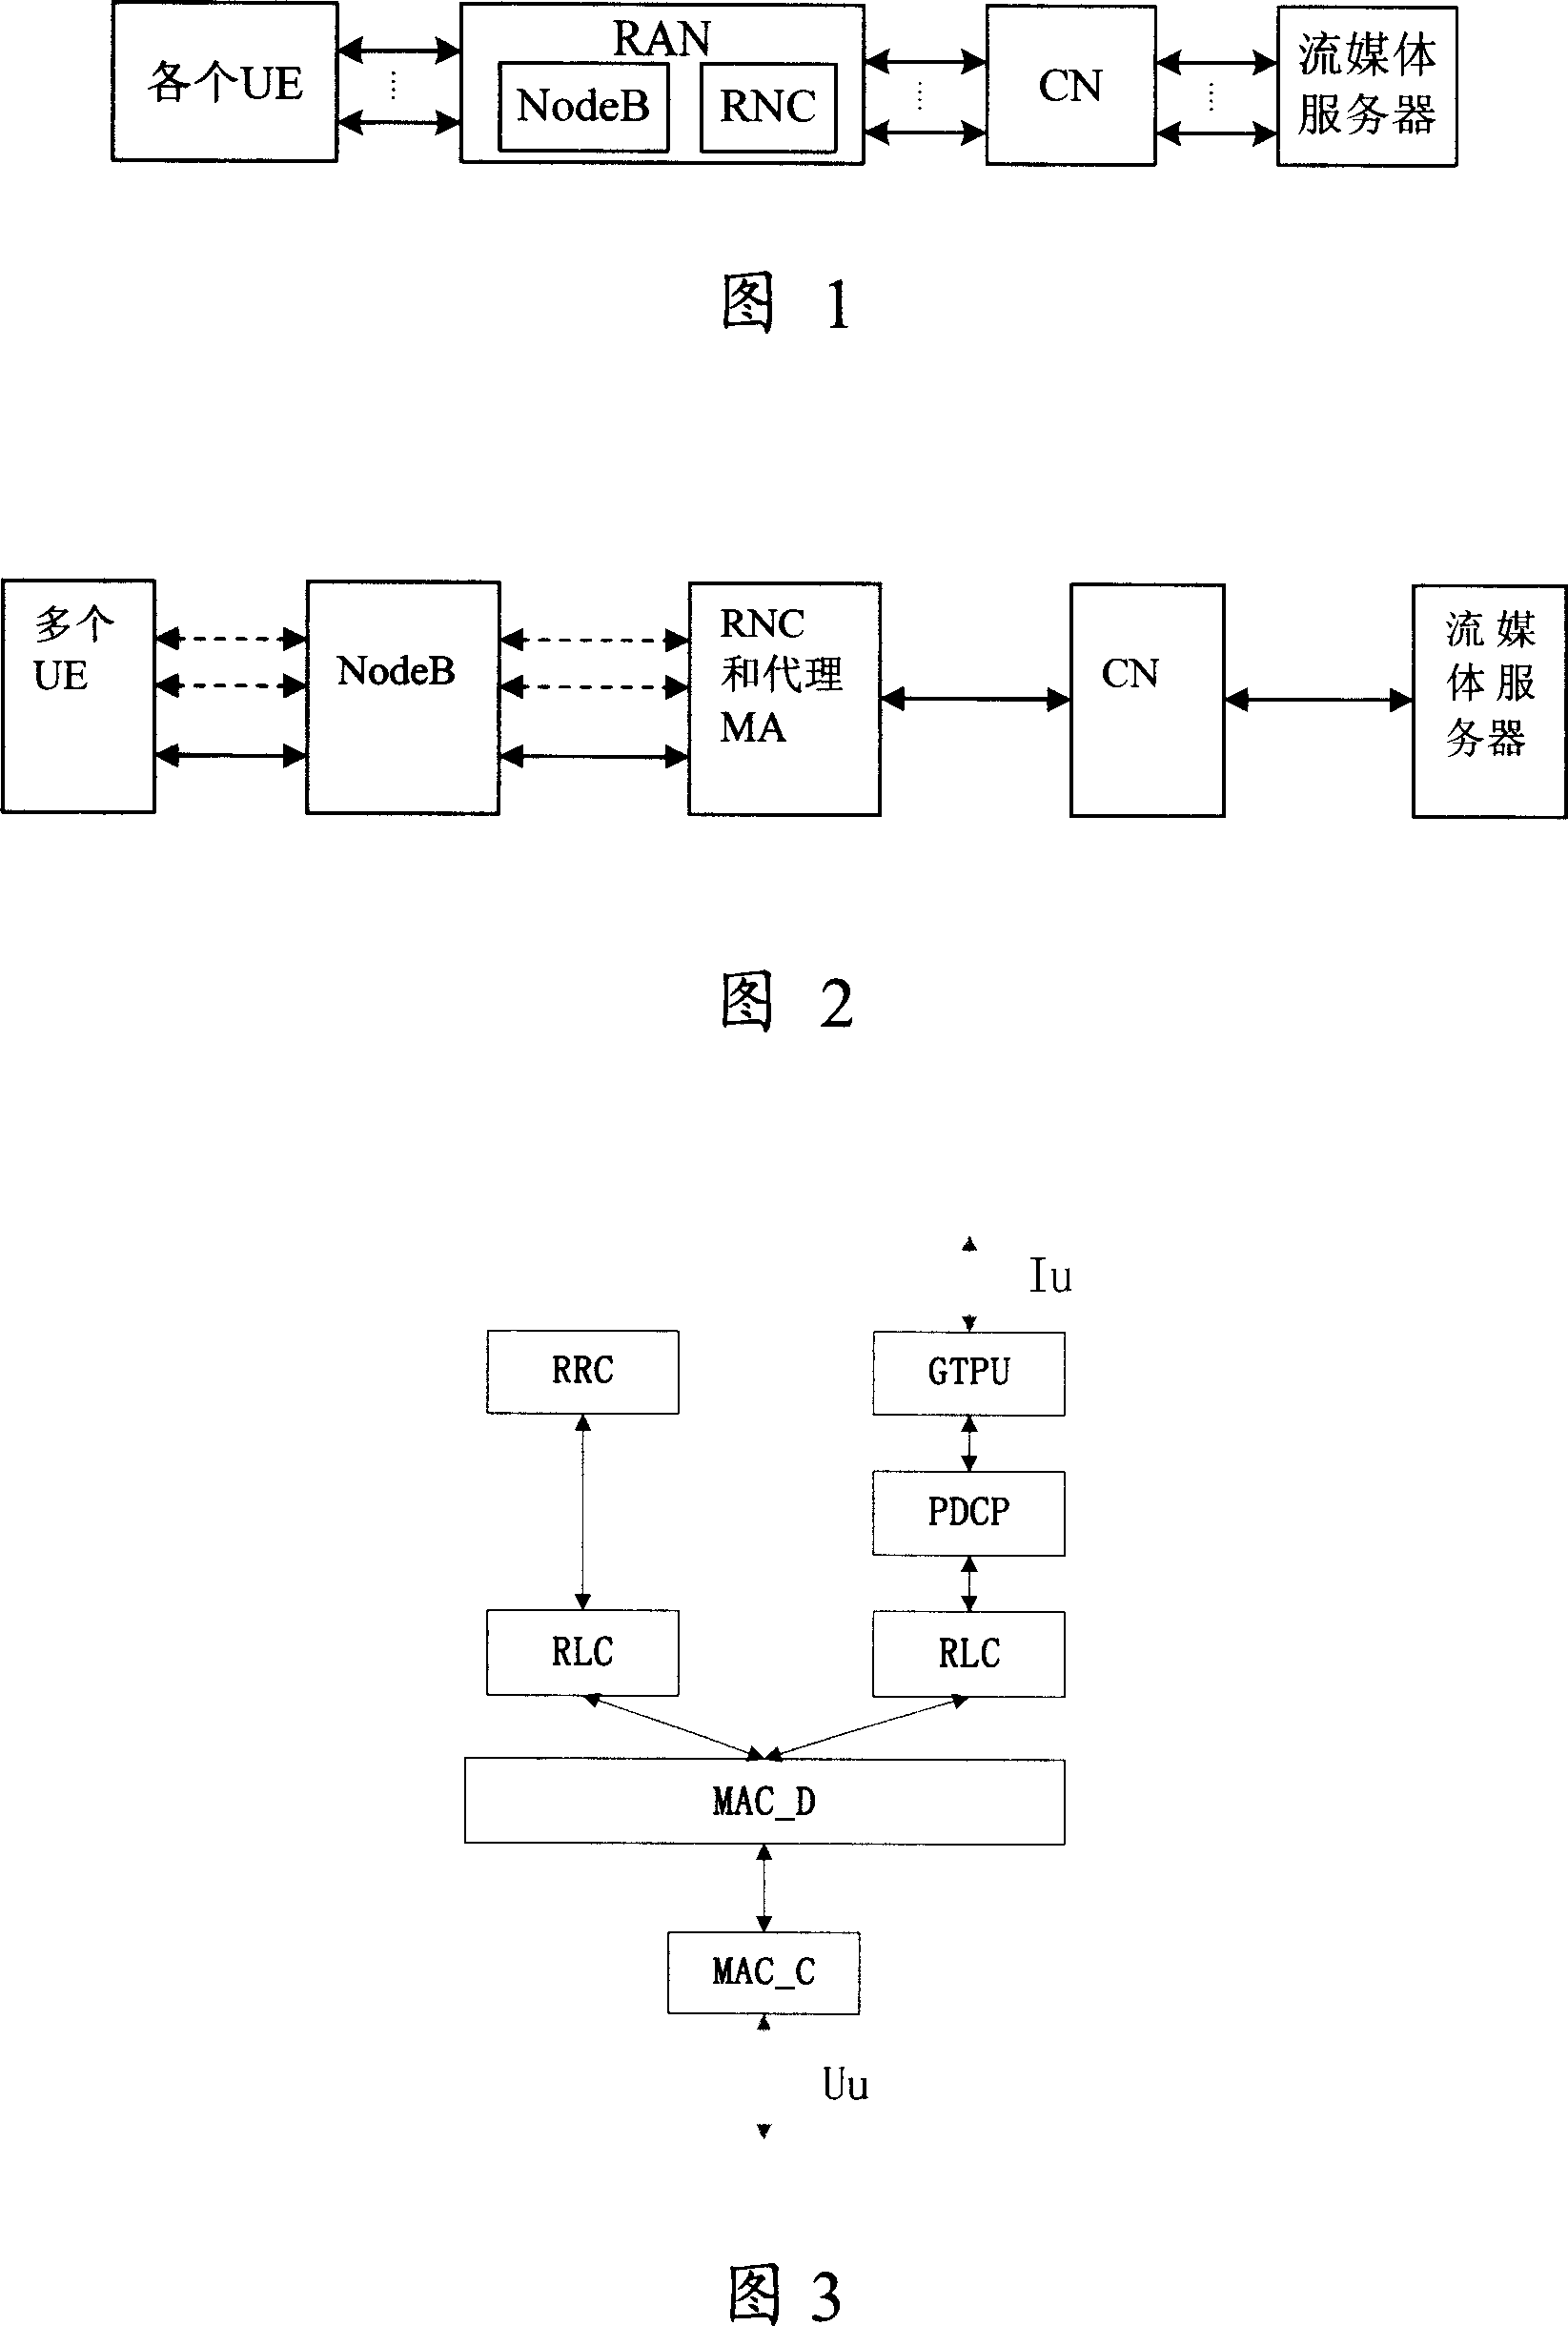 A holding method for cross-Iur interface connection of the multicast service and DRNC